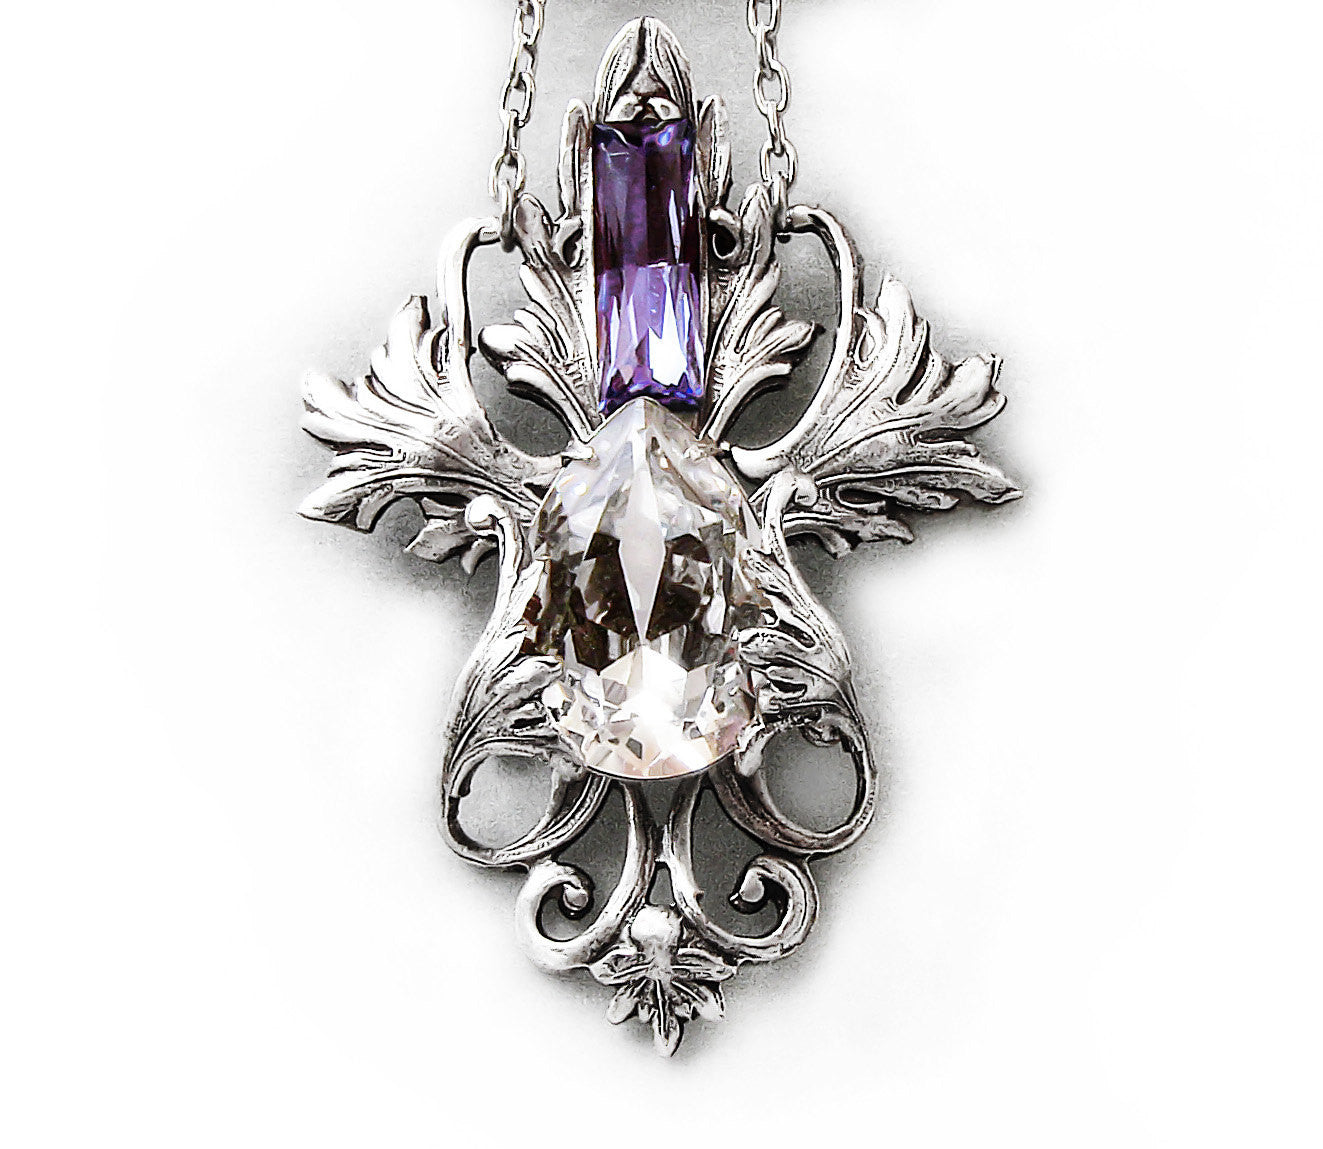 Victorian Silver Necklace with Tanzanite and Clear Crystals - Aranwen's Jewelry
 - 1